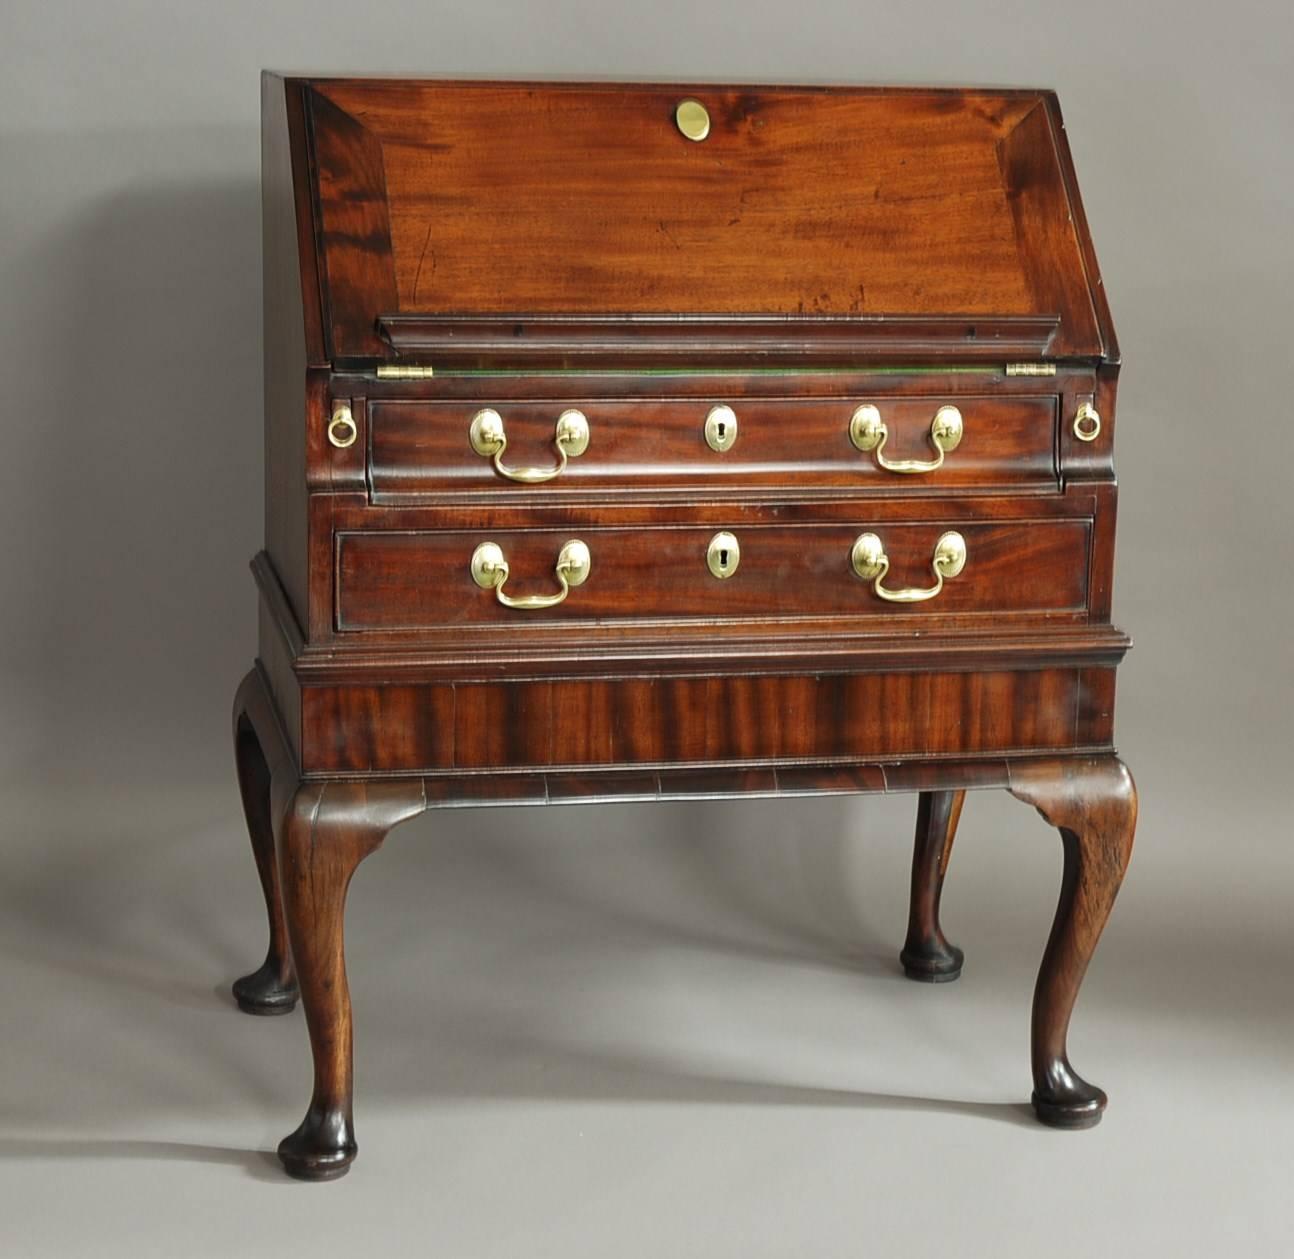 Great Britain (UK) Rare Mid-18th Century Mahogany Bureau on Stand of Small Proportions For Sale